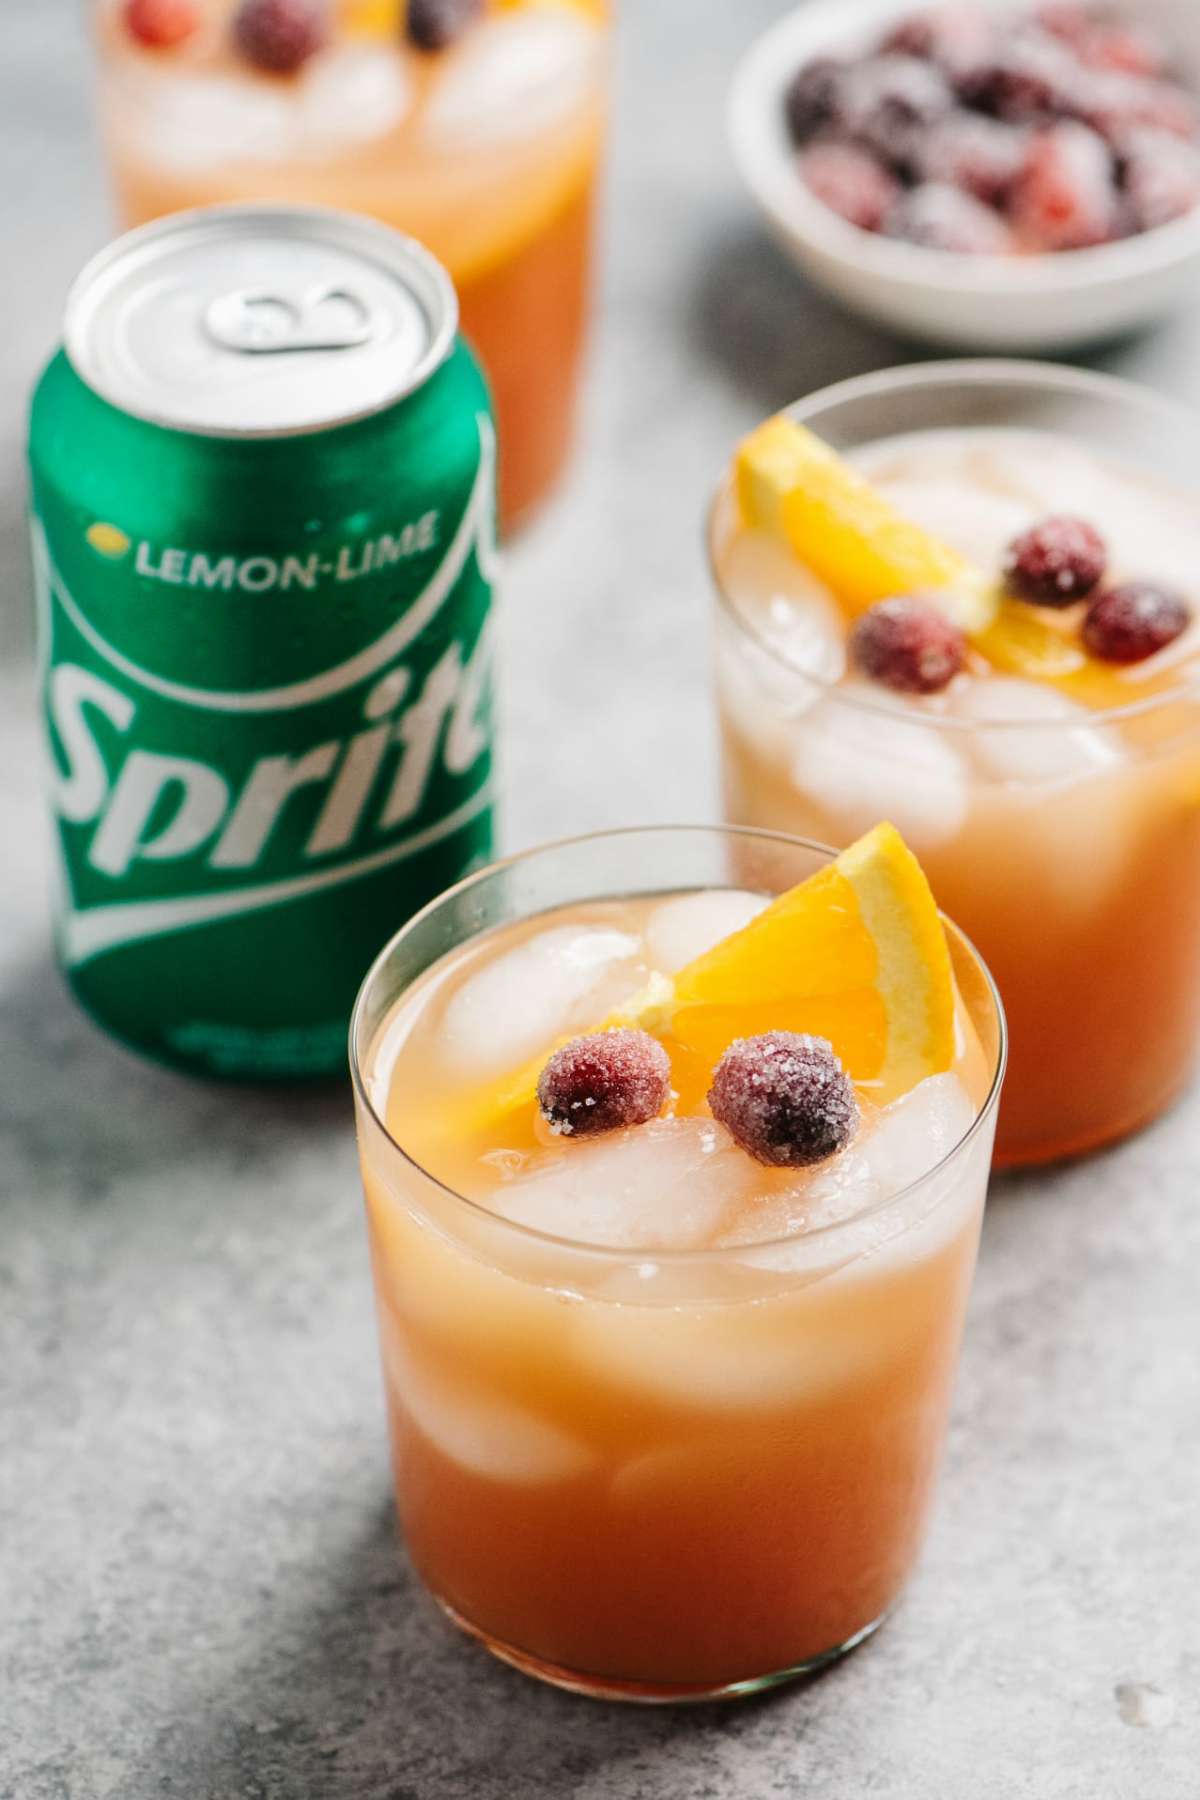 Cranberry cocktail near a can of Sprite.